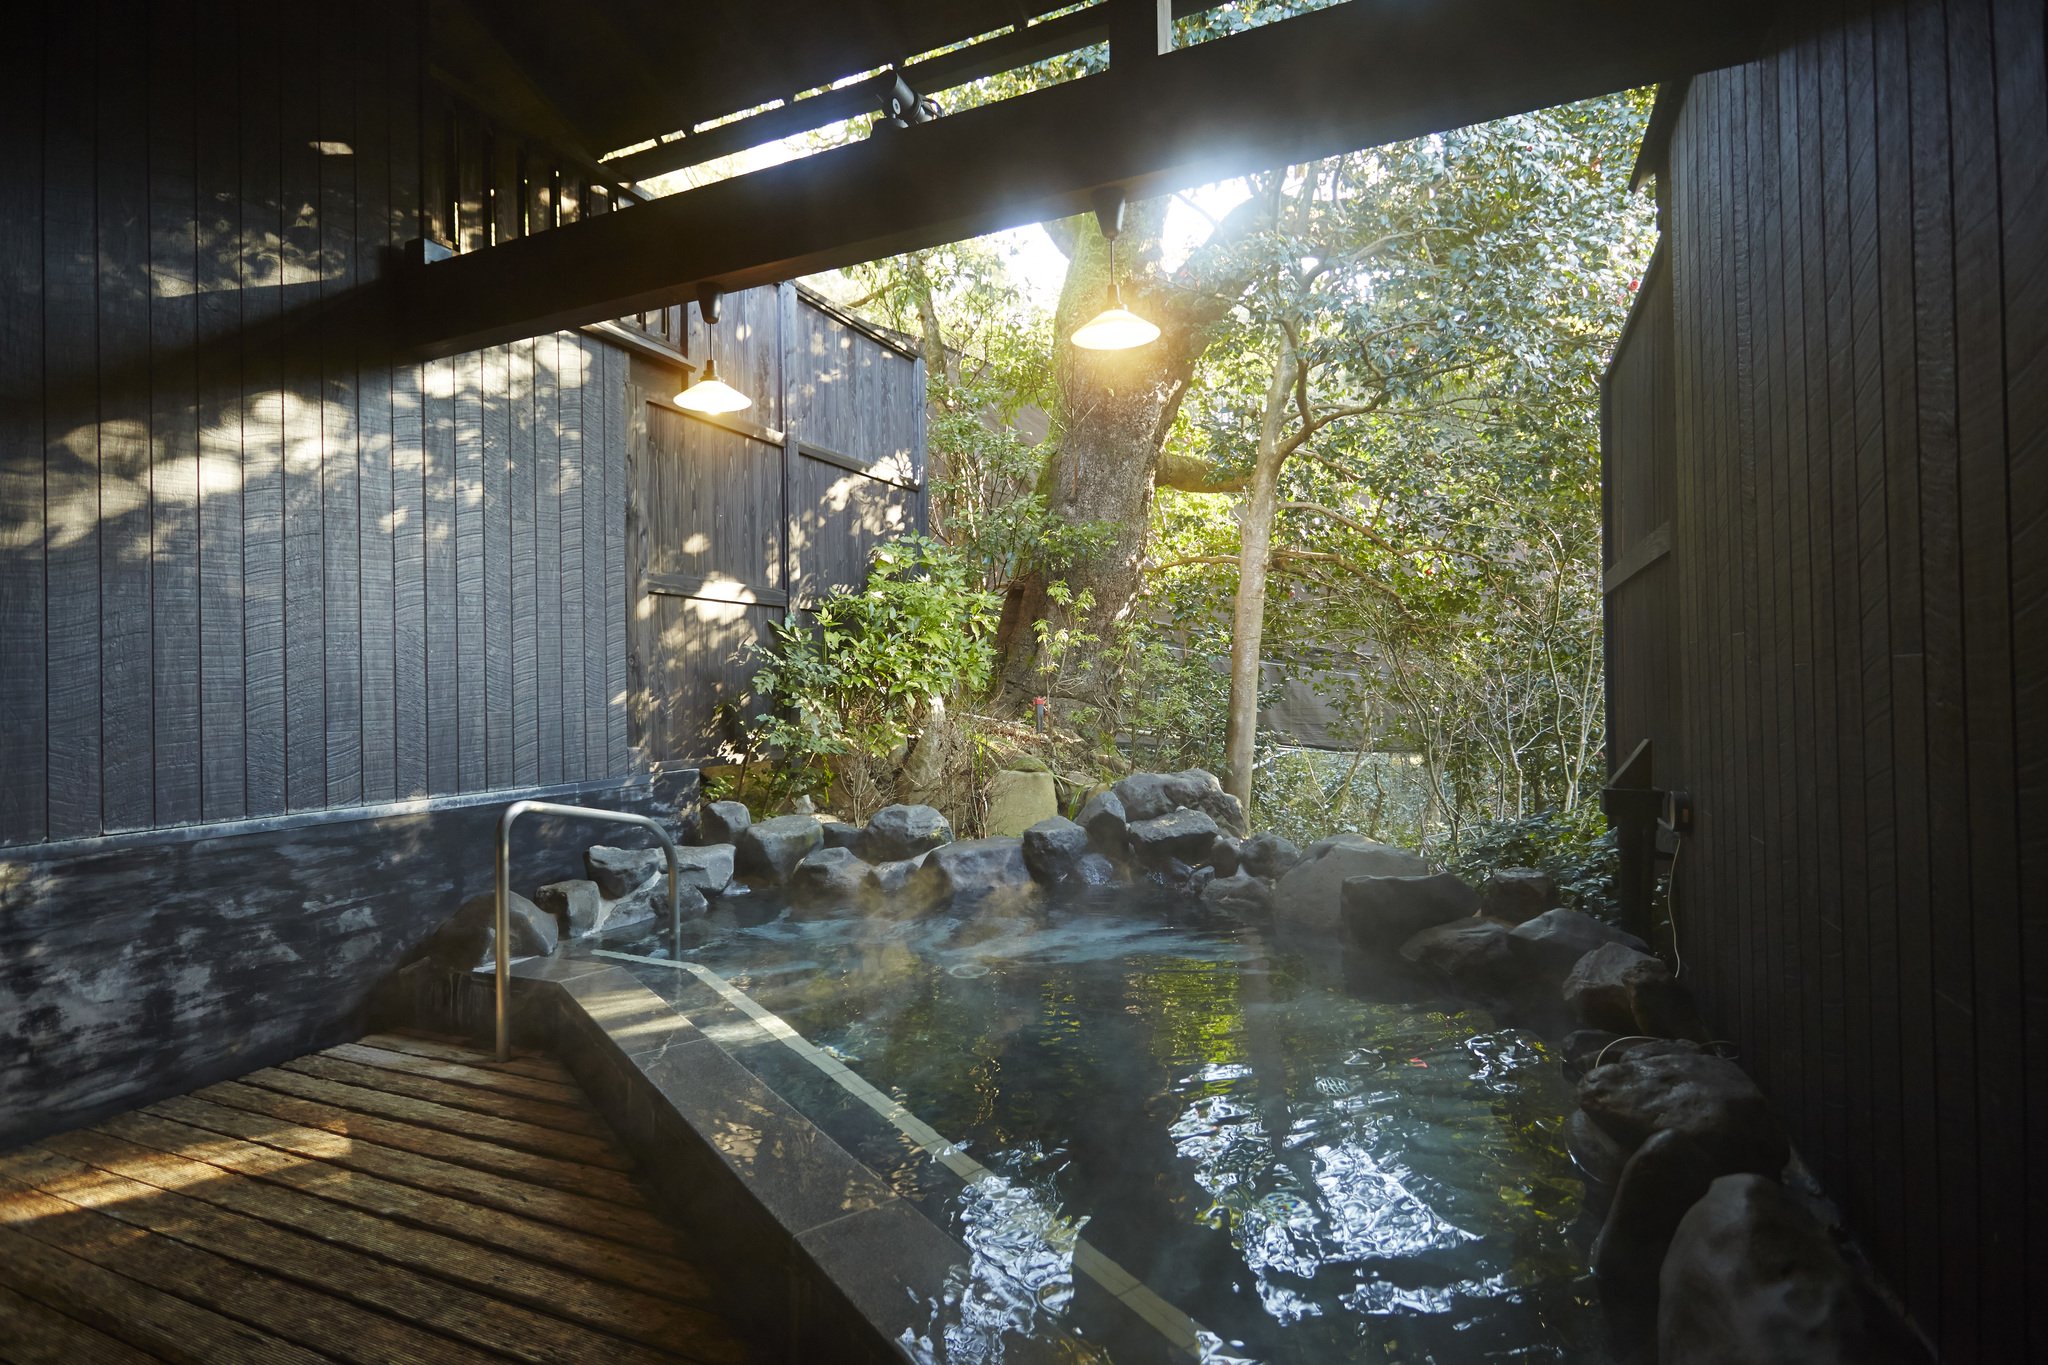 A Japanese professional baseball team will open a hotel with onsen